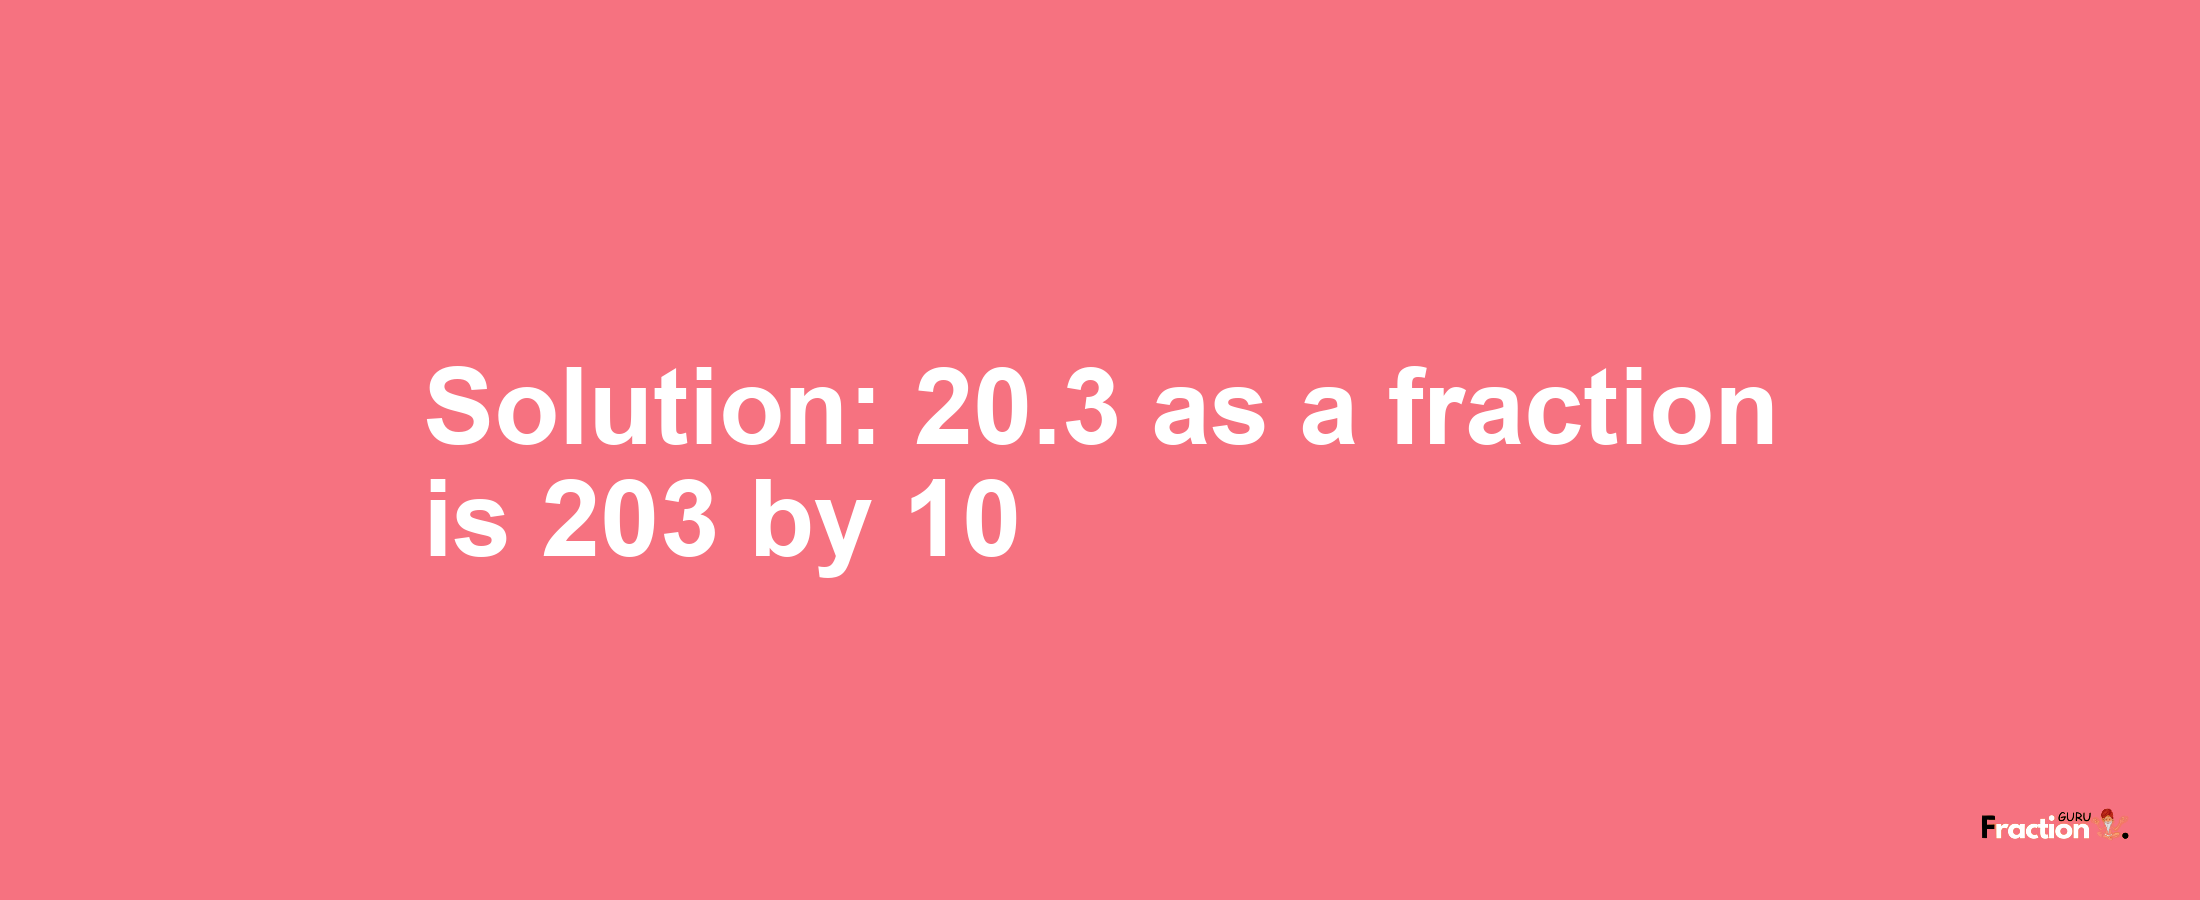 Solution:20.3 as a fraction is 203/10